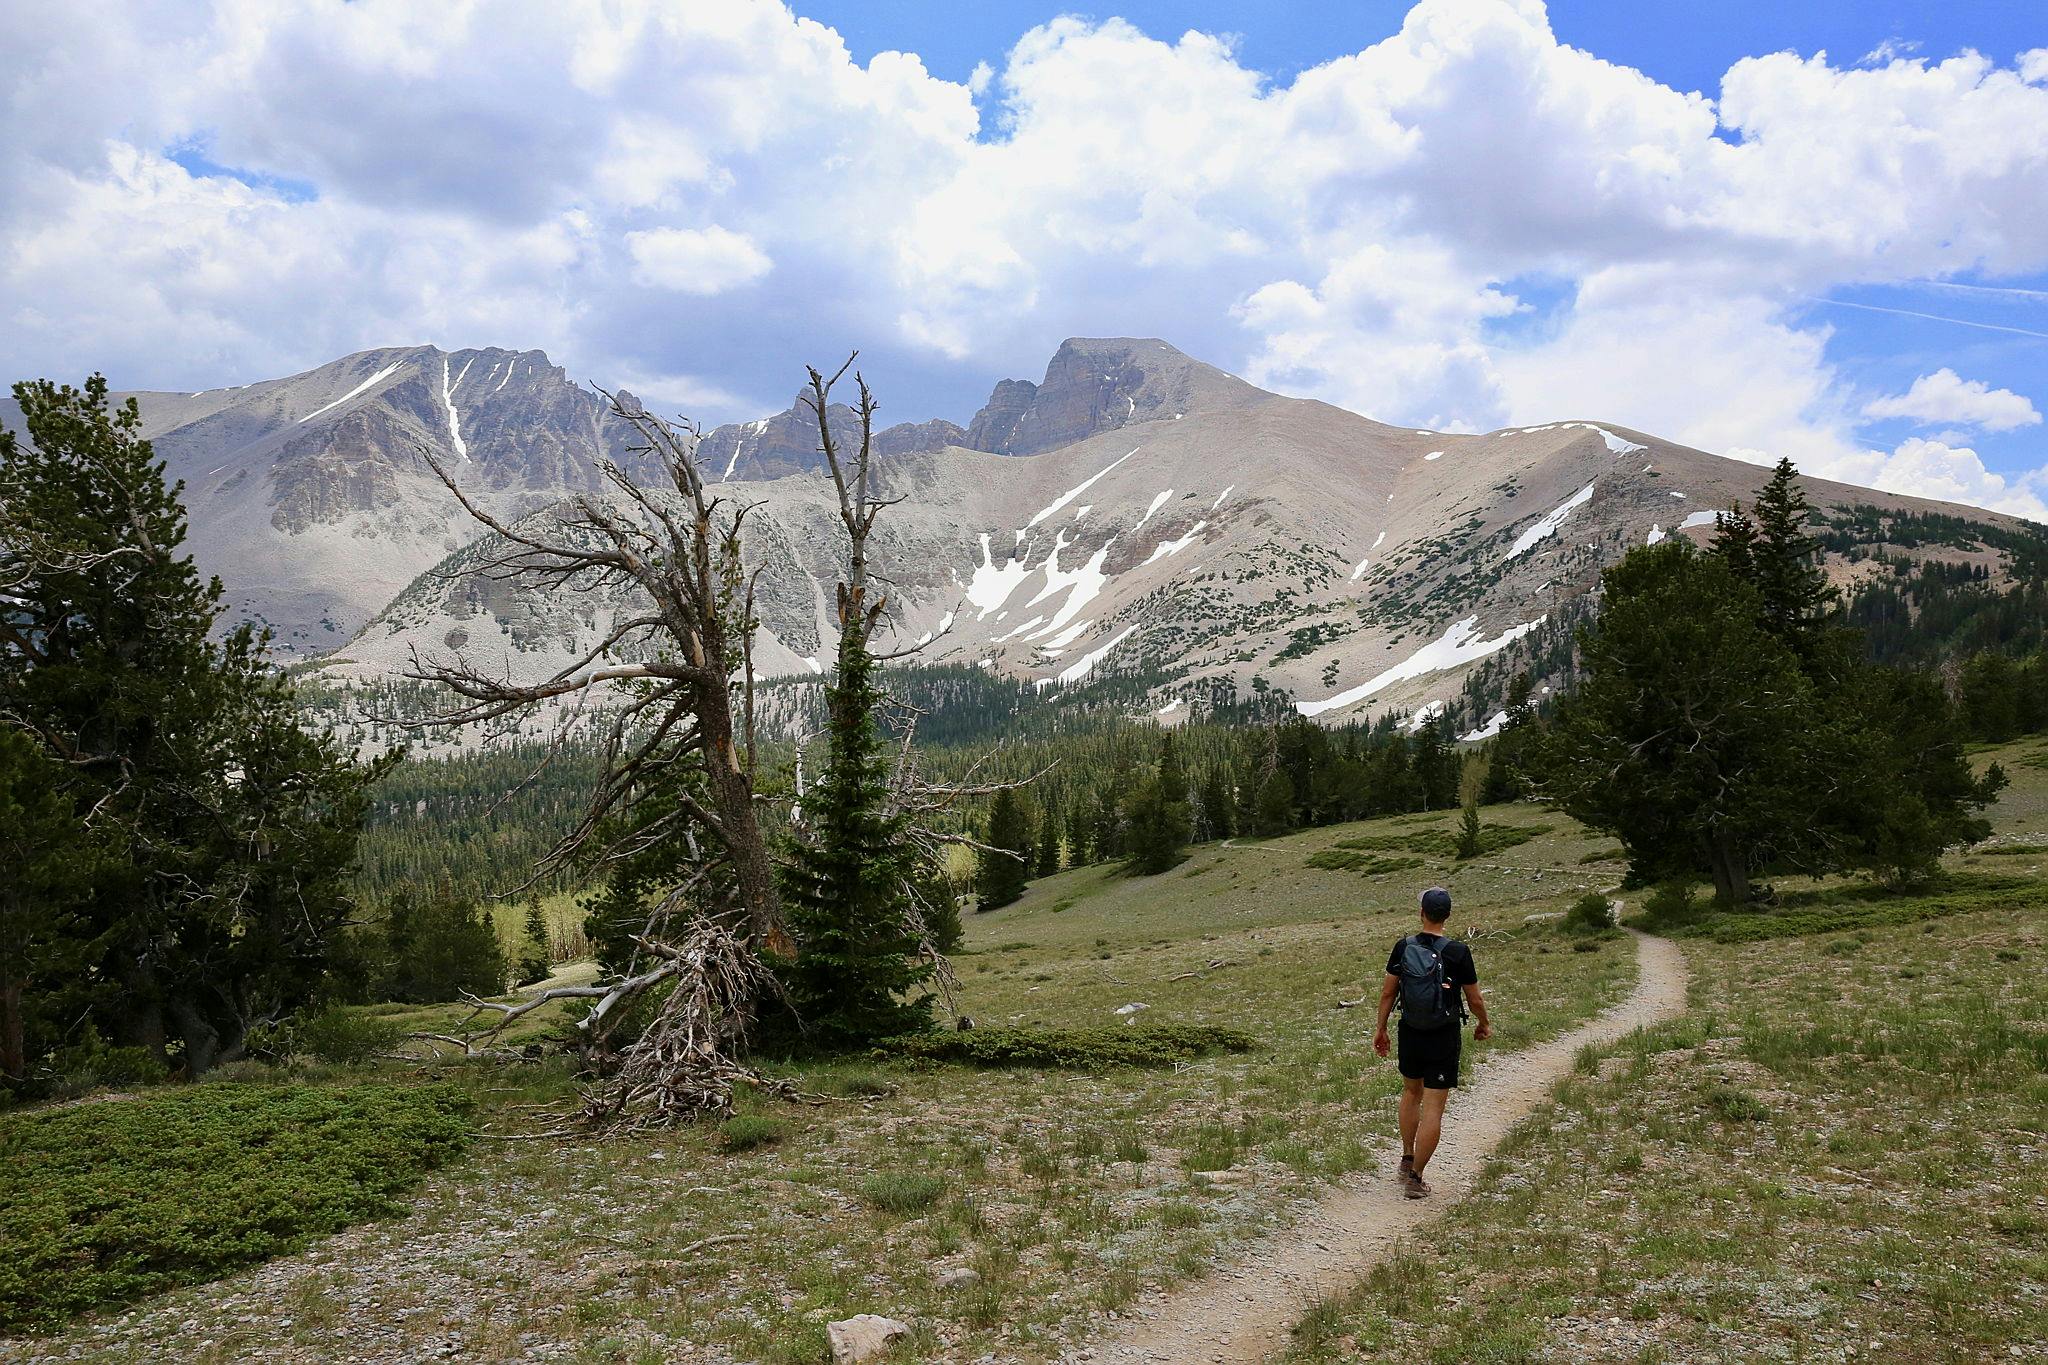 Person hiking in a grassy meadow towards Wheeler Peak mountain in the distance at Great Basin National Park in Nevada